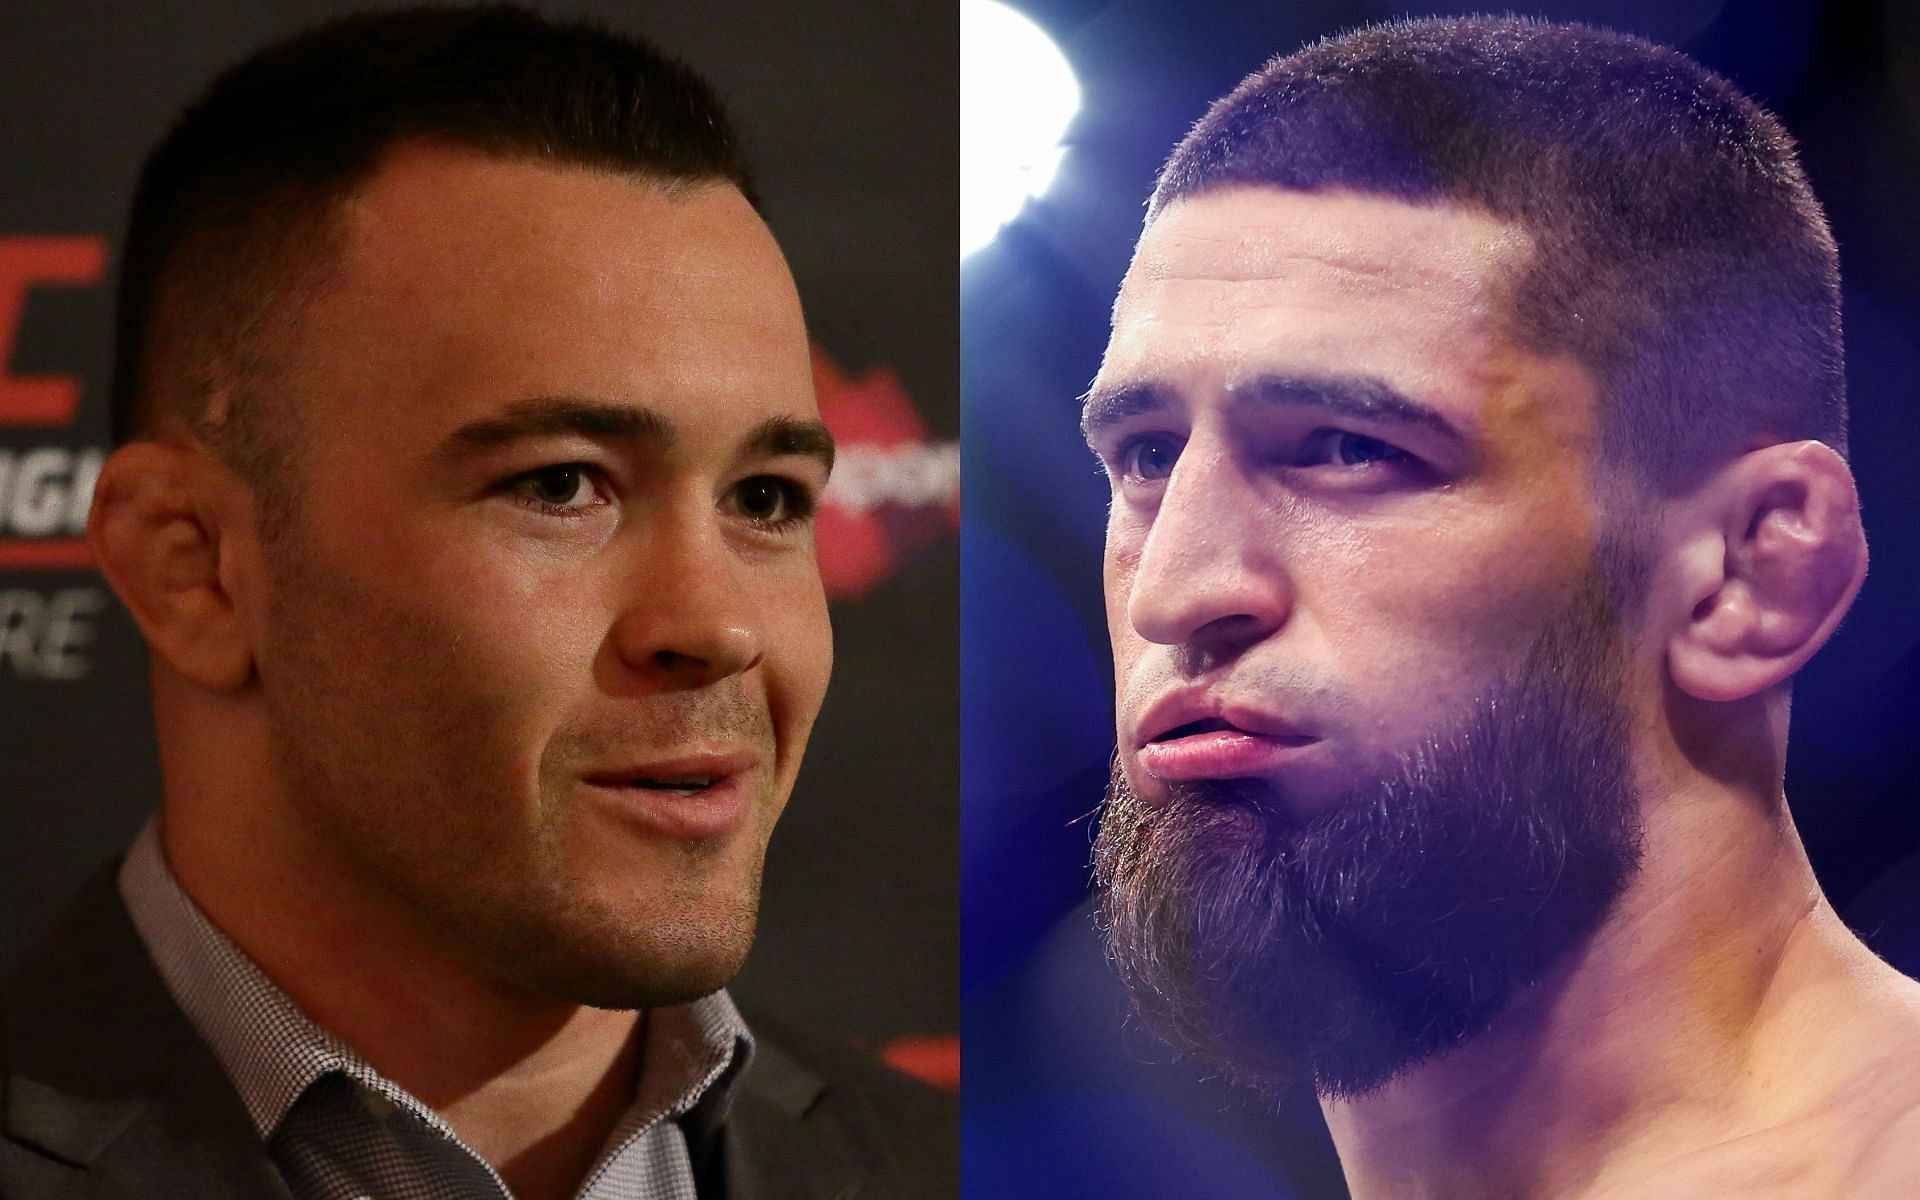 Colby Covington (left) and Khamzat Chimaev (right) (Images via Getty)